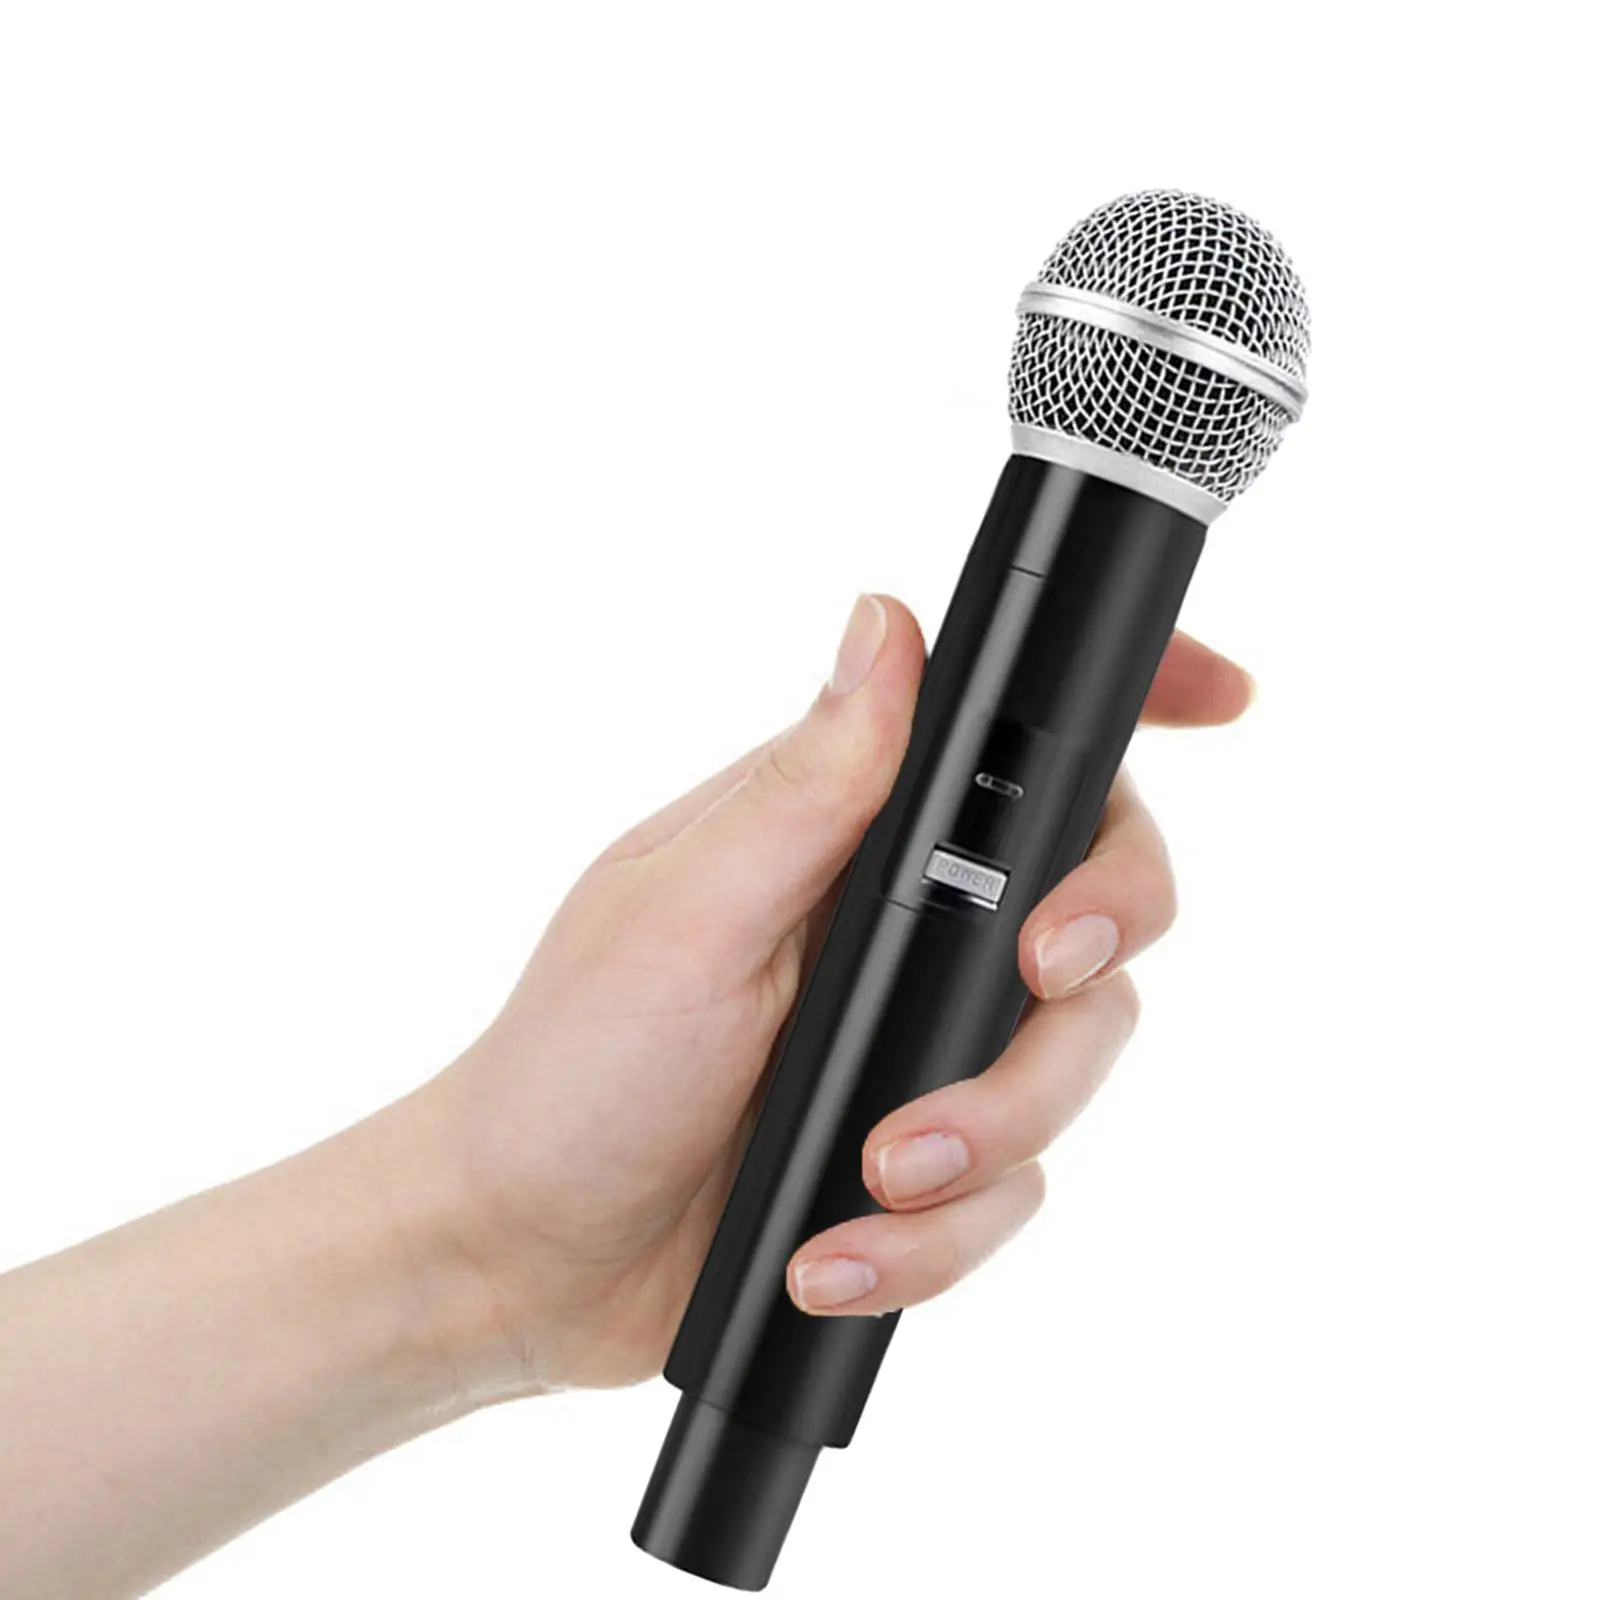 Fake Prop Microphone Props Handheld Pretend Play Artificial Microphone for Family Reunion Weddings Cosplay Thanksgiving Birthday